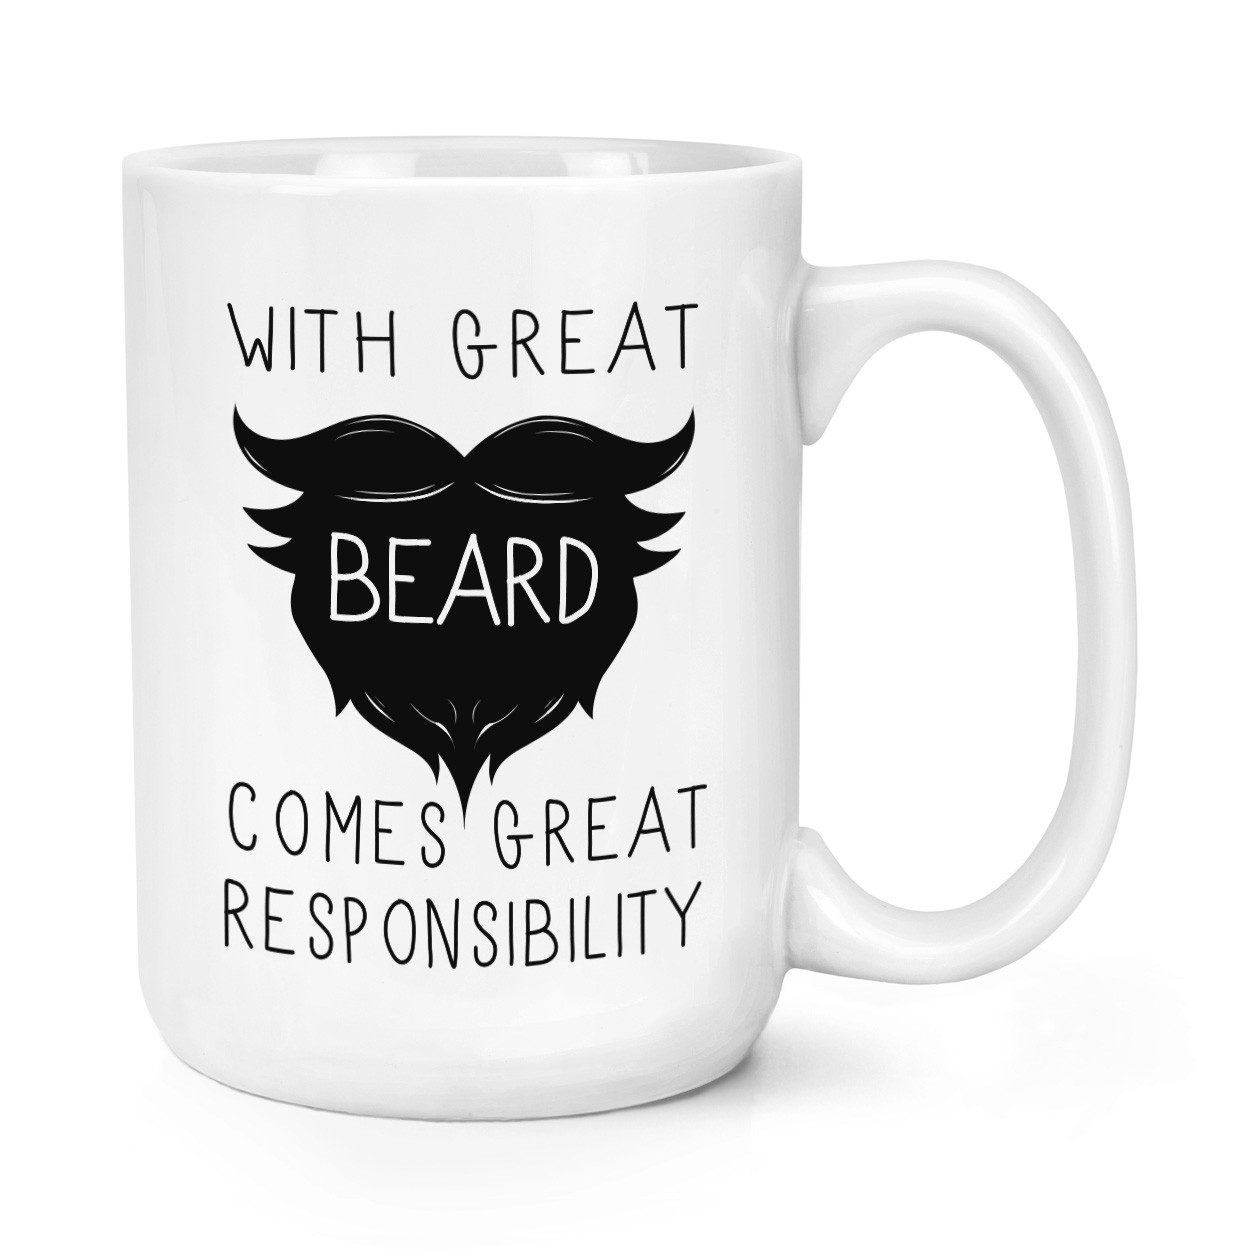 With Great Beard Comes Great Responsibility 15oz Large Mug Cup